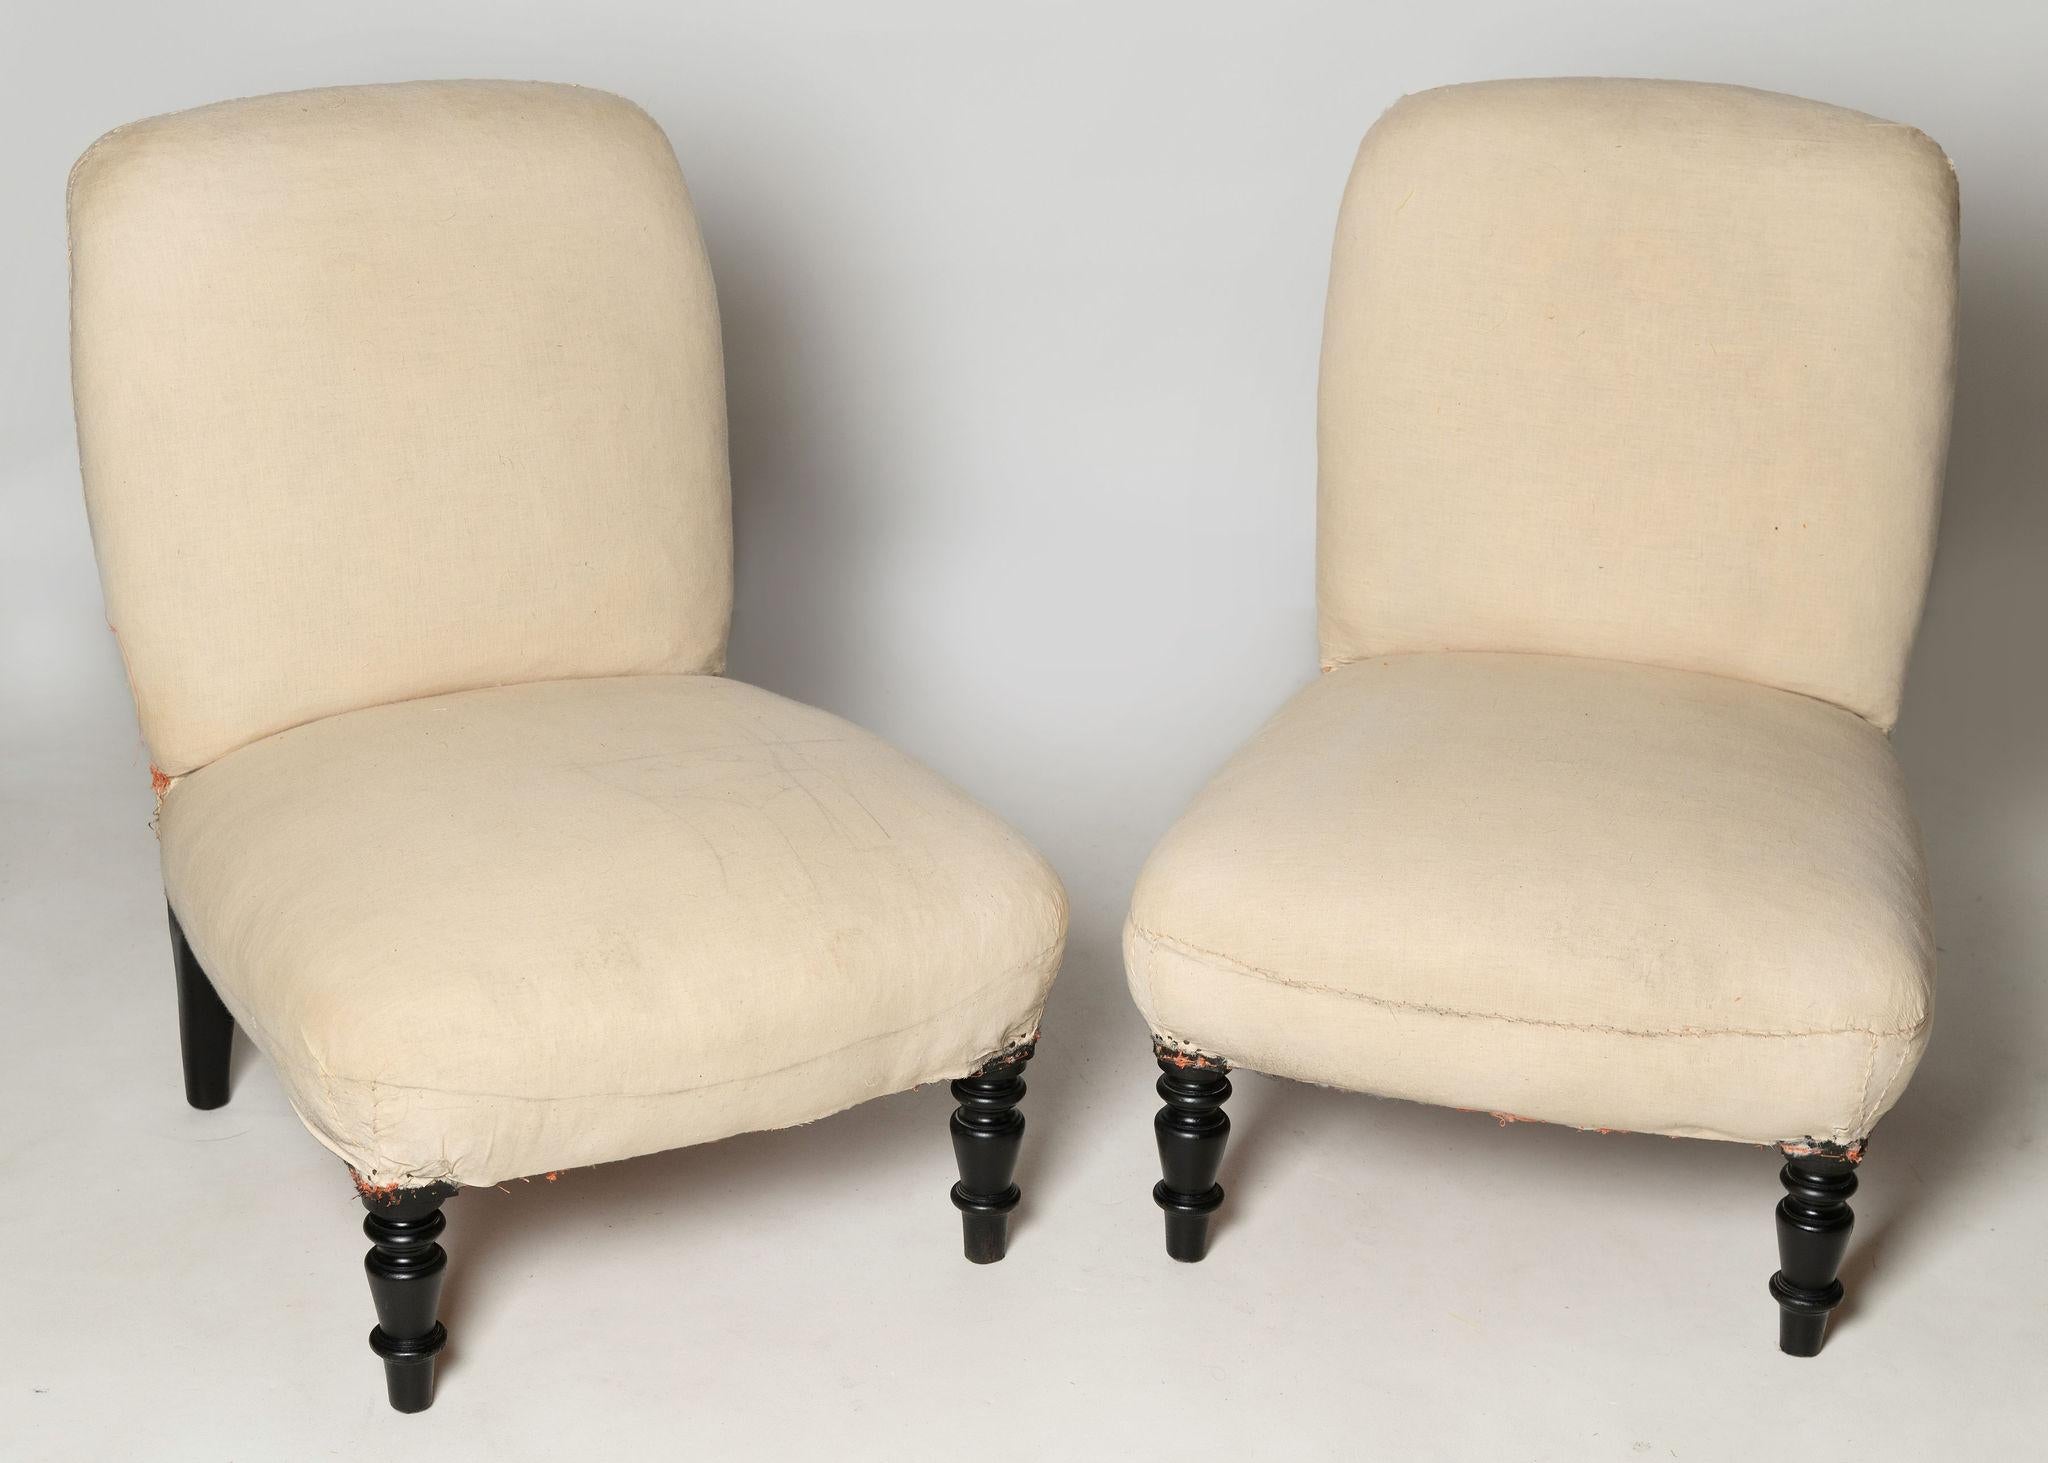 Unusual shape pair of antique French slipper chairs, ideal fireside, bedroom or occasional chairs. Seat depth 18 inches. Floor to seat 12.5 inches. Ready for upholstery, structurally sound. 

Width: 21 